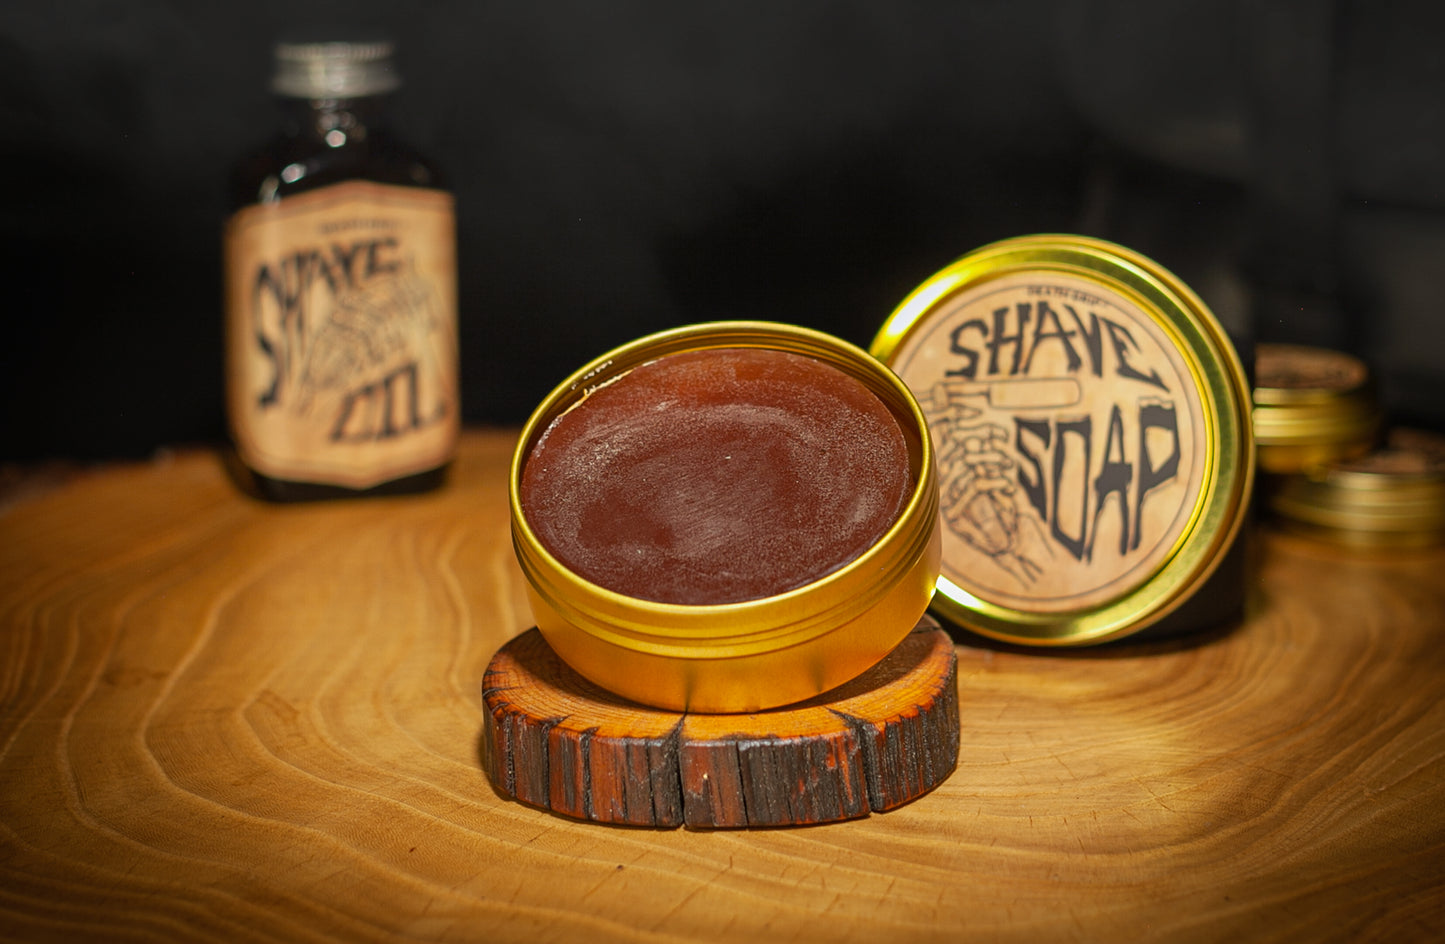 All Natural Tea Tree Shave Soap - African Black (4oz)